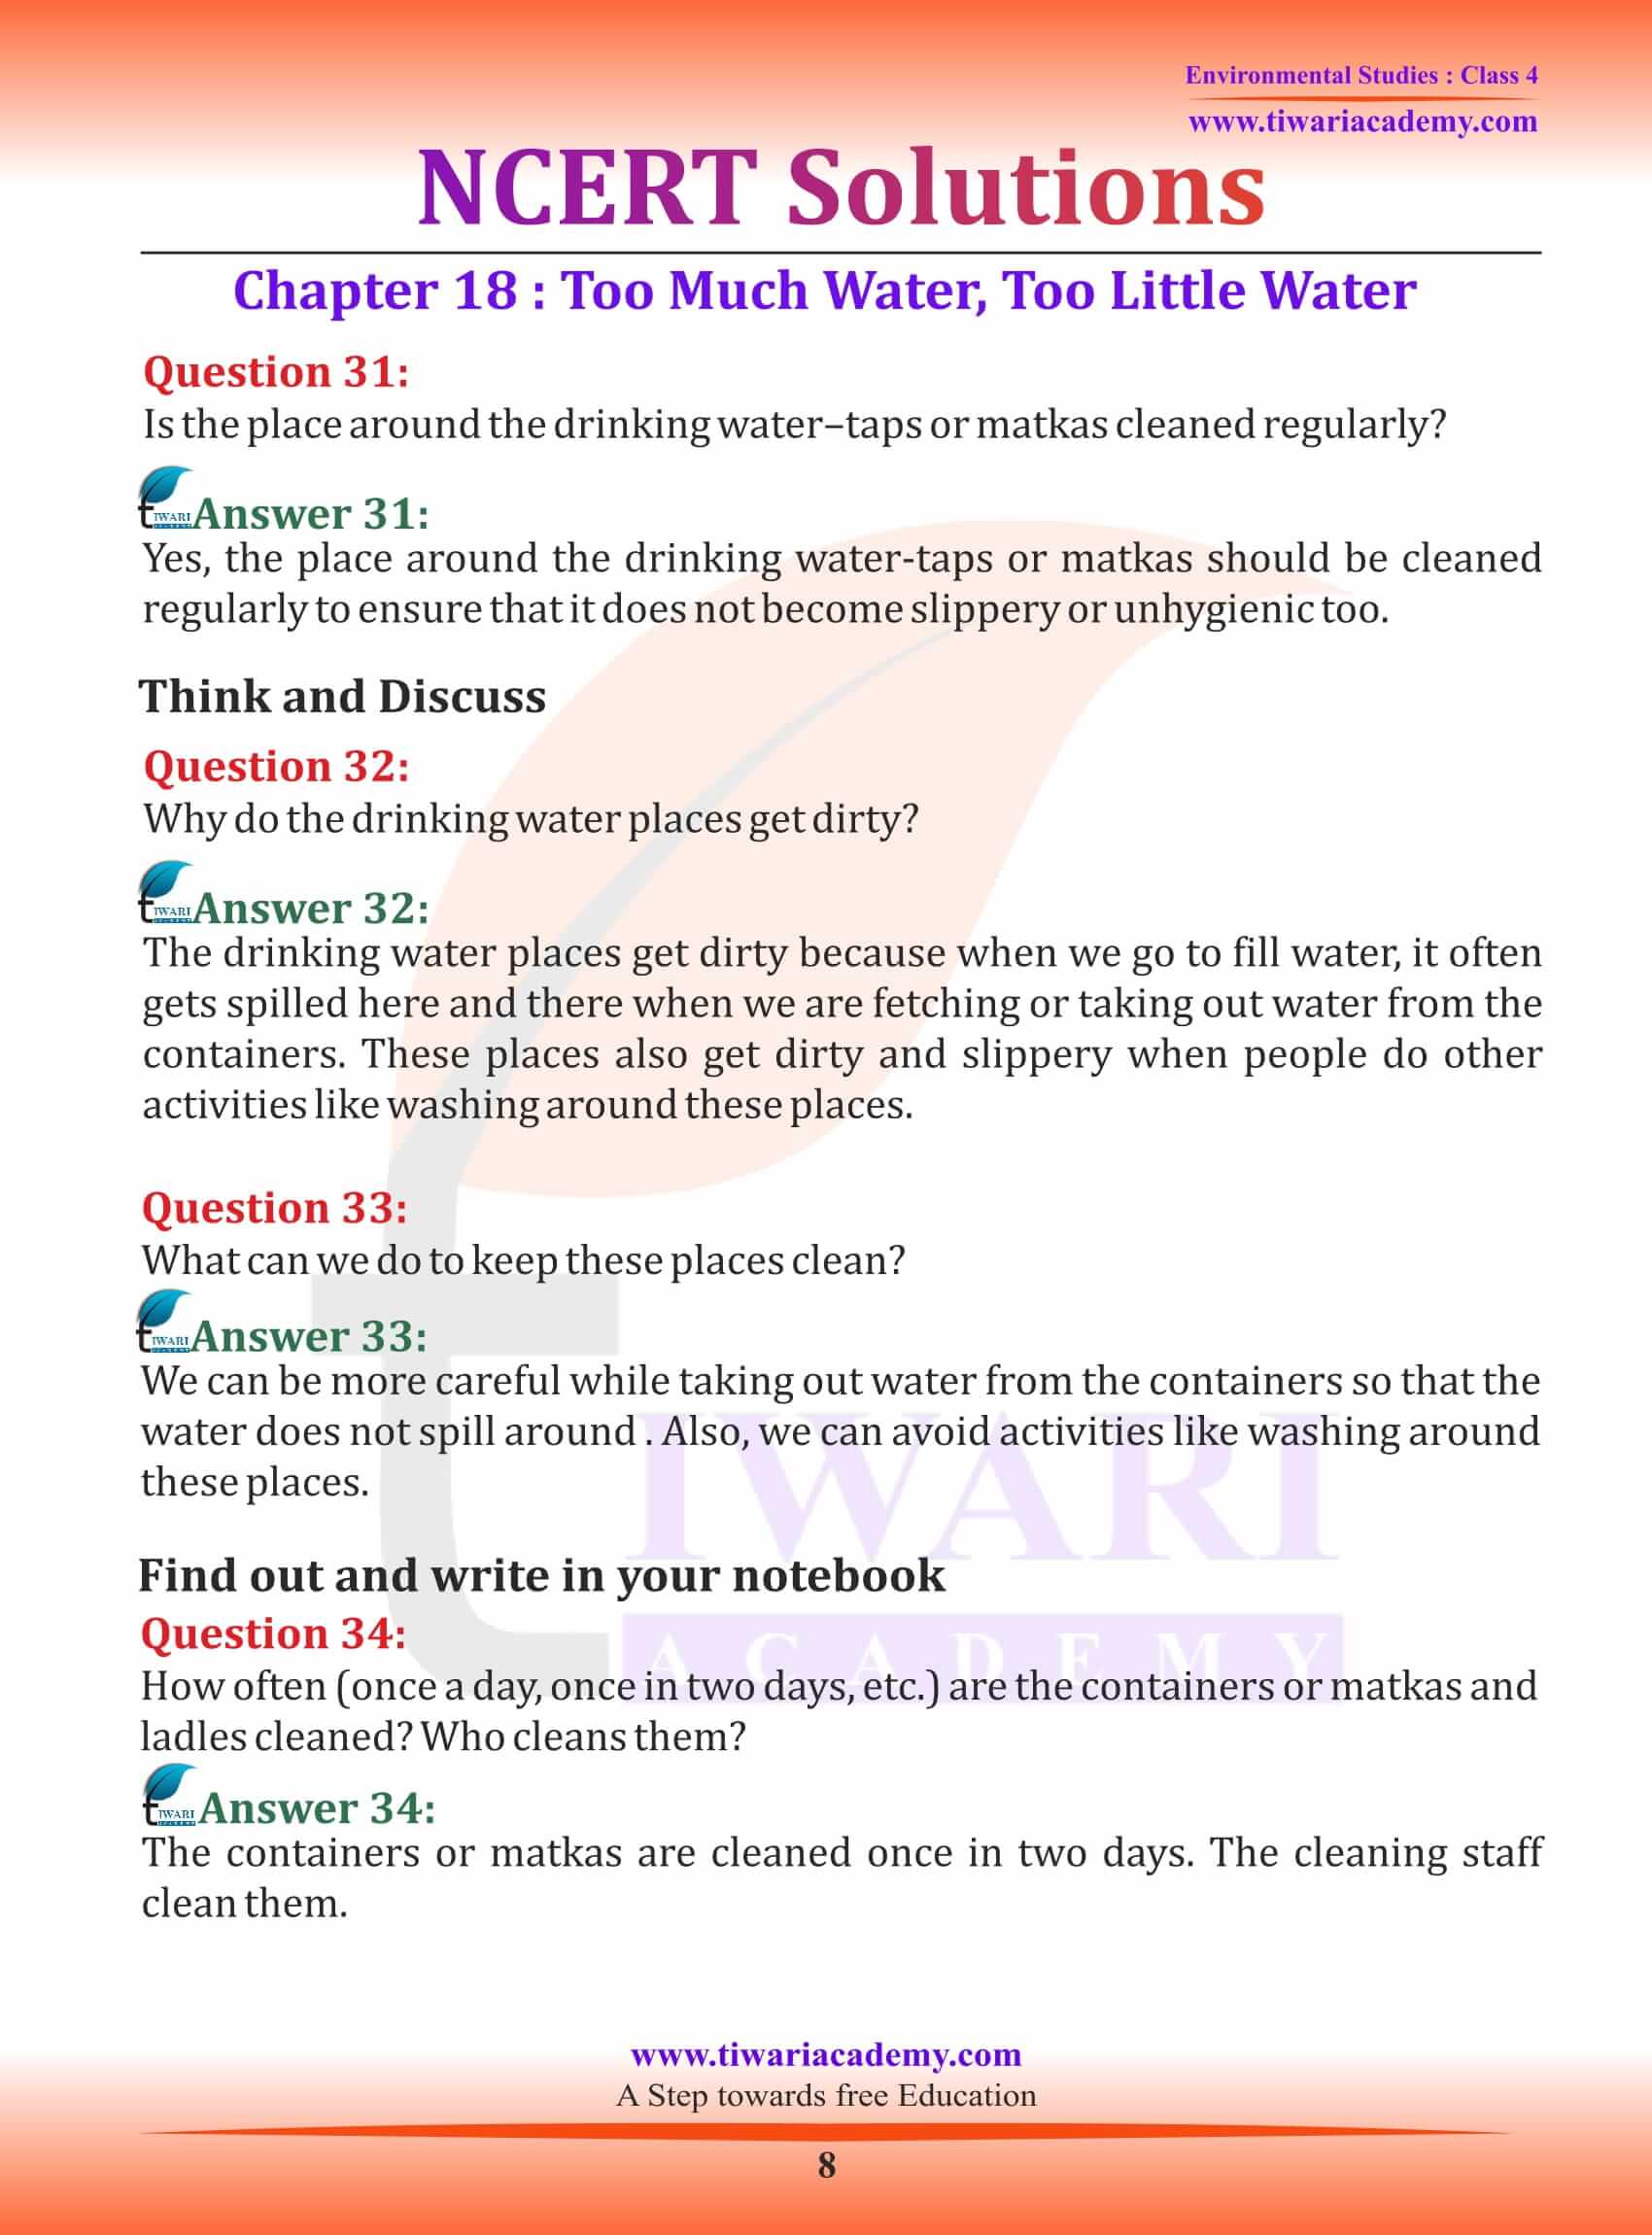 NCERT Solutions for Class 4 EVS Chapter 18 in English